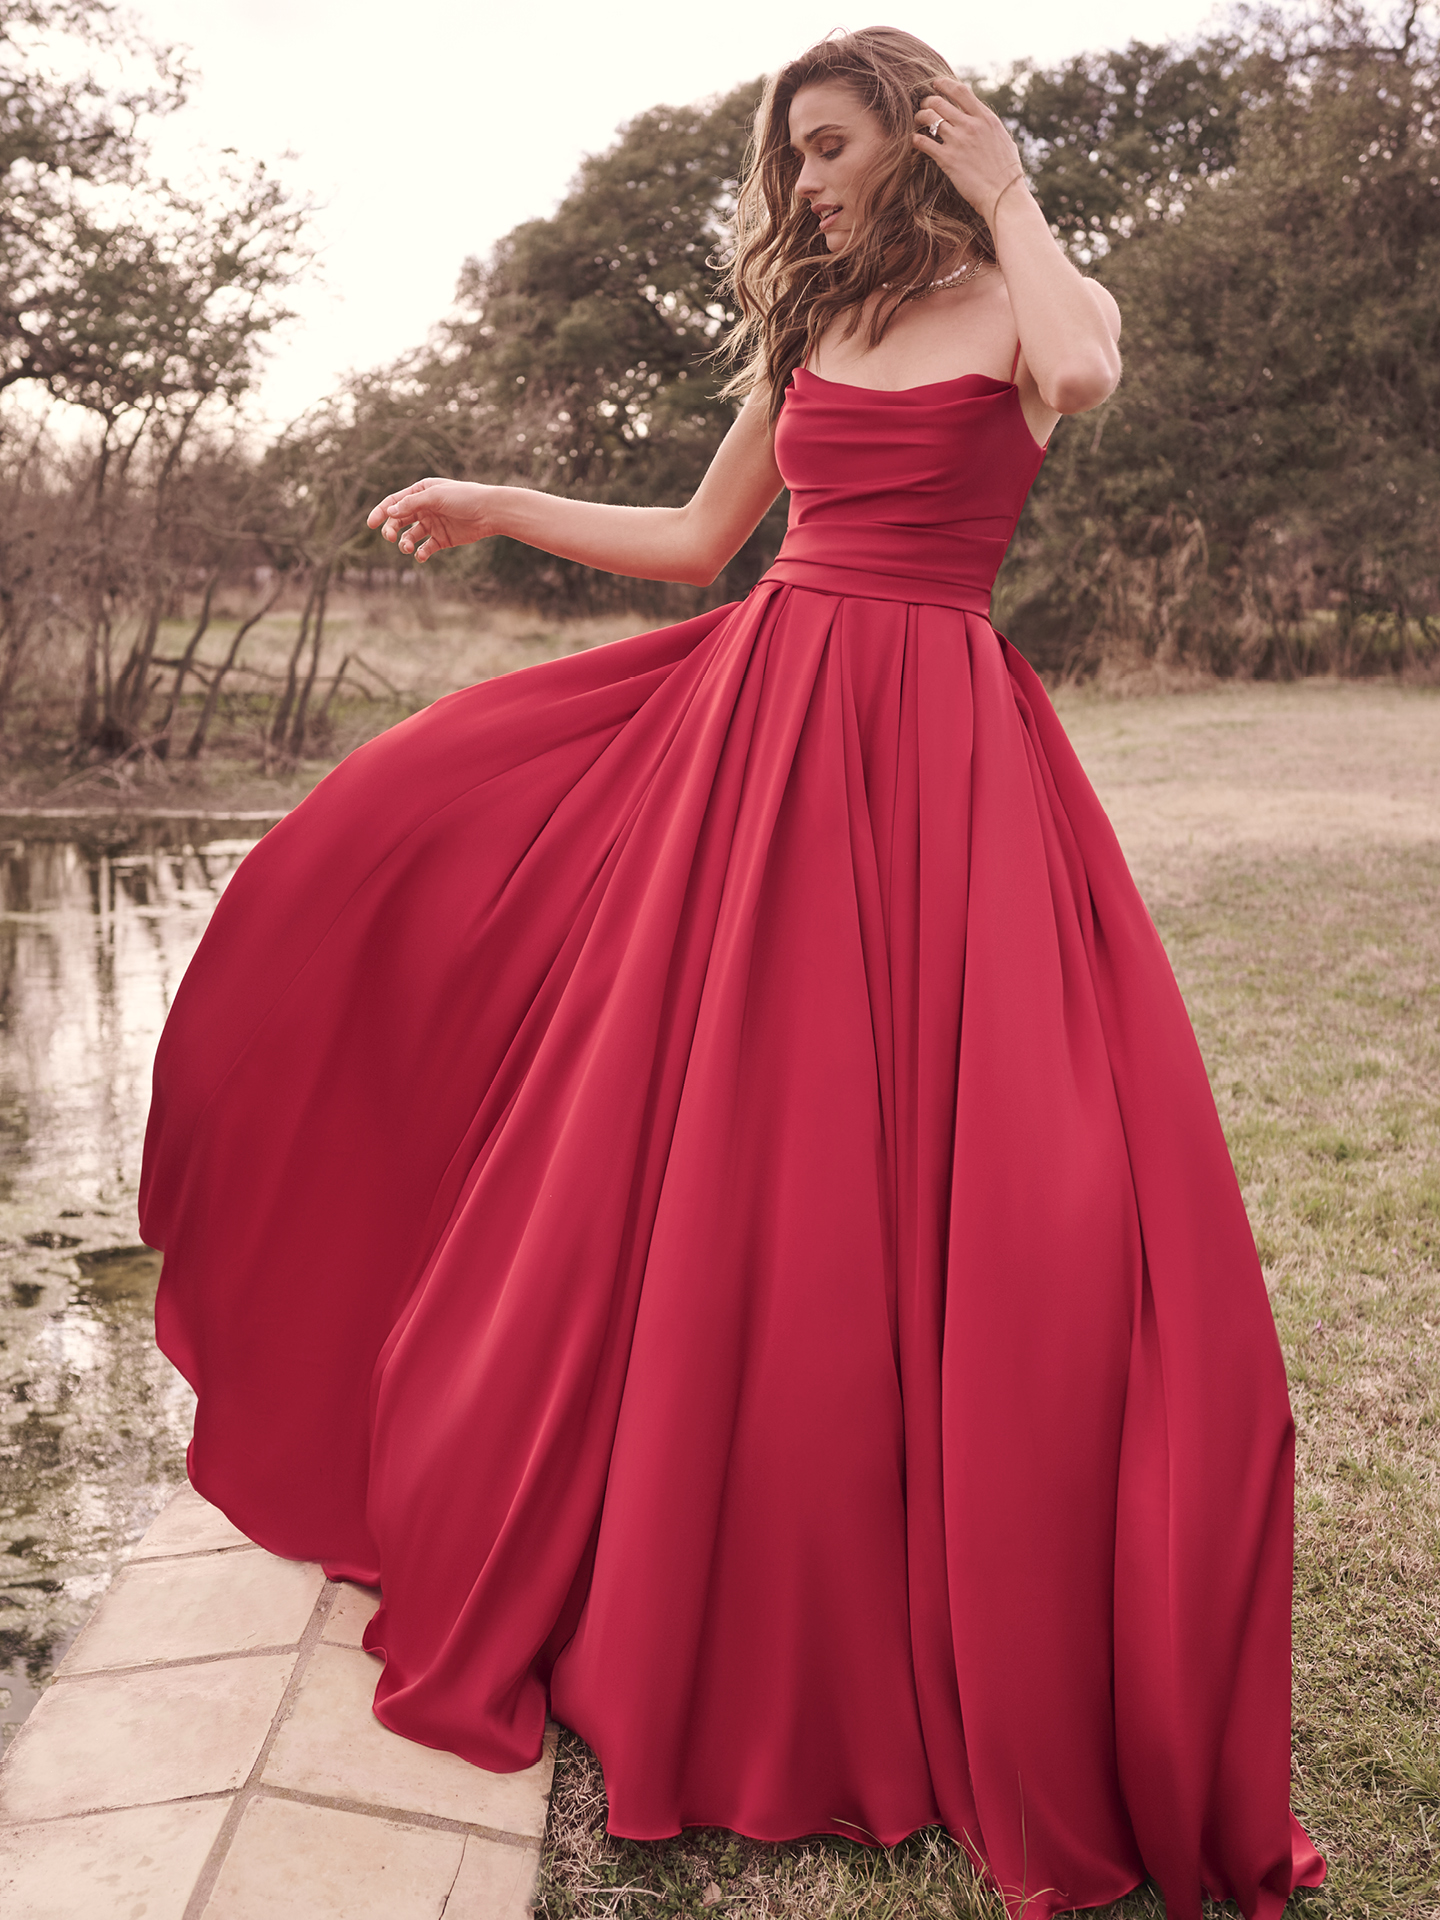 Bride In Red Wedding Dress Called Scarlet By Maggie Sottero